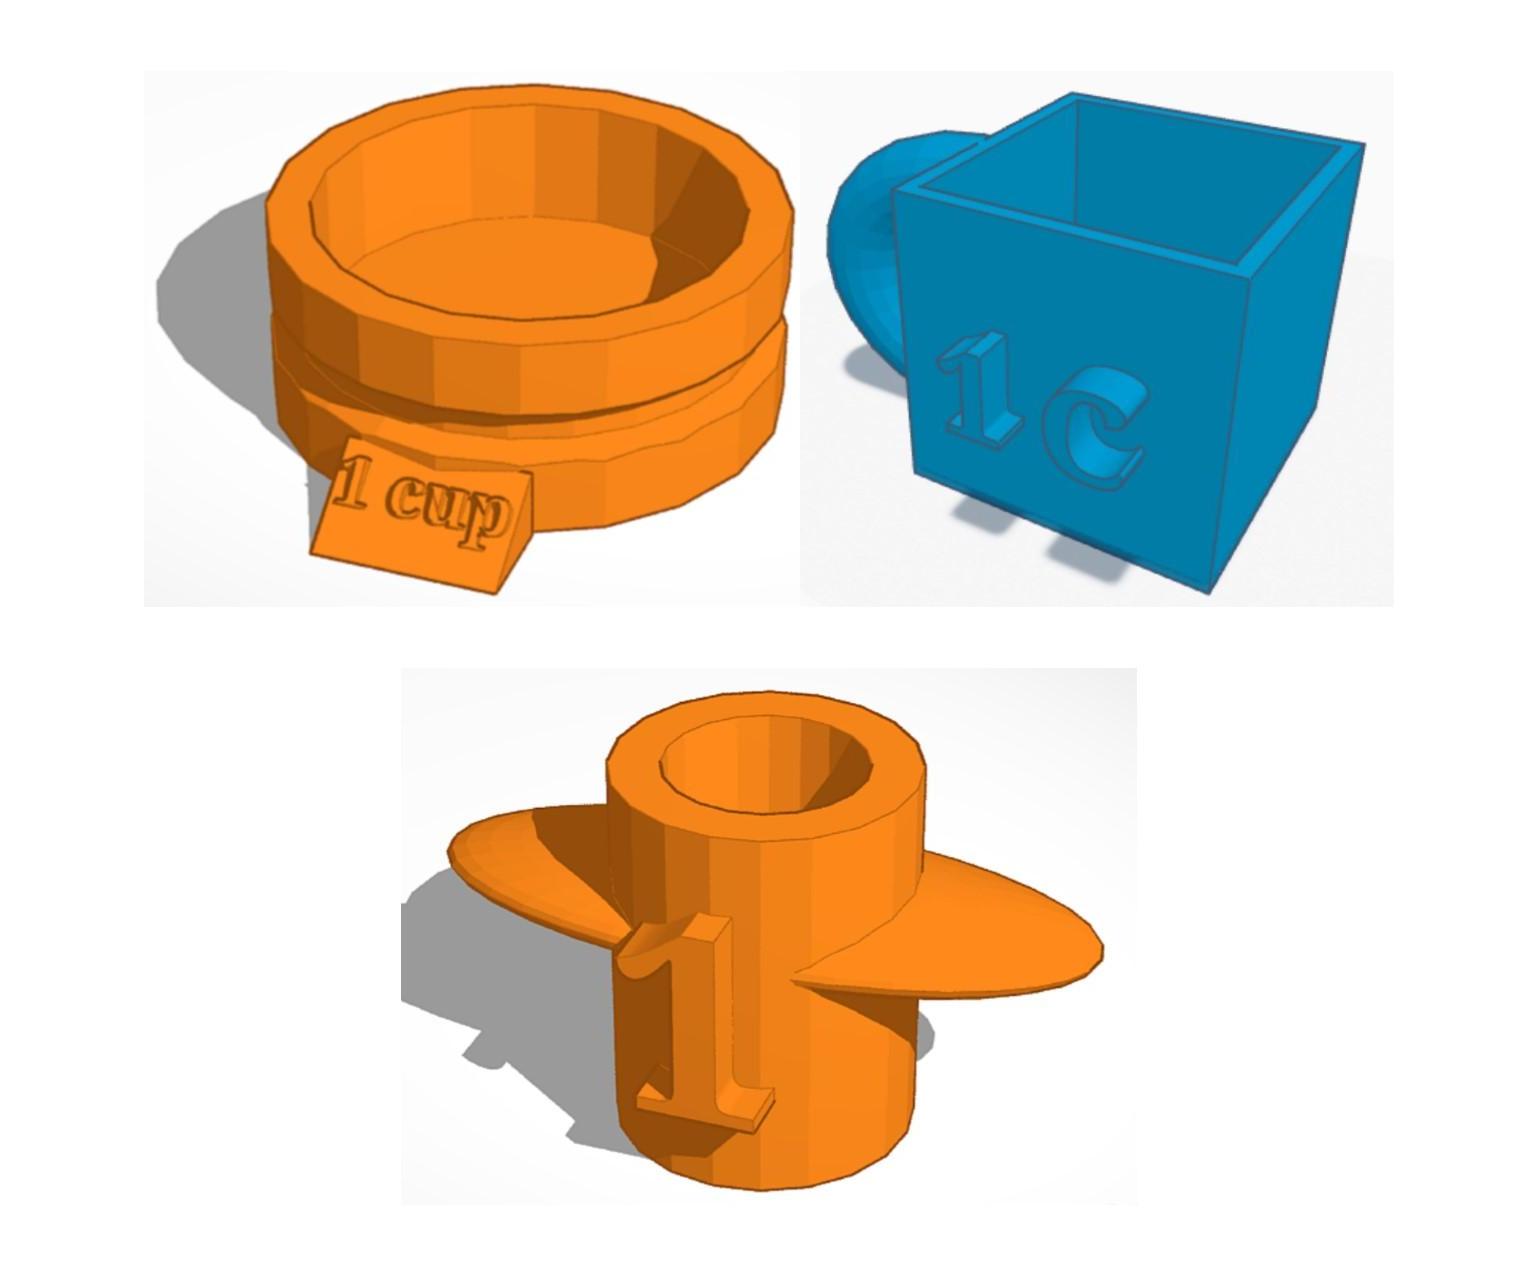 3D Printed Measuring Cups: Middle School Volume Activity 